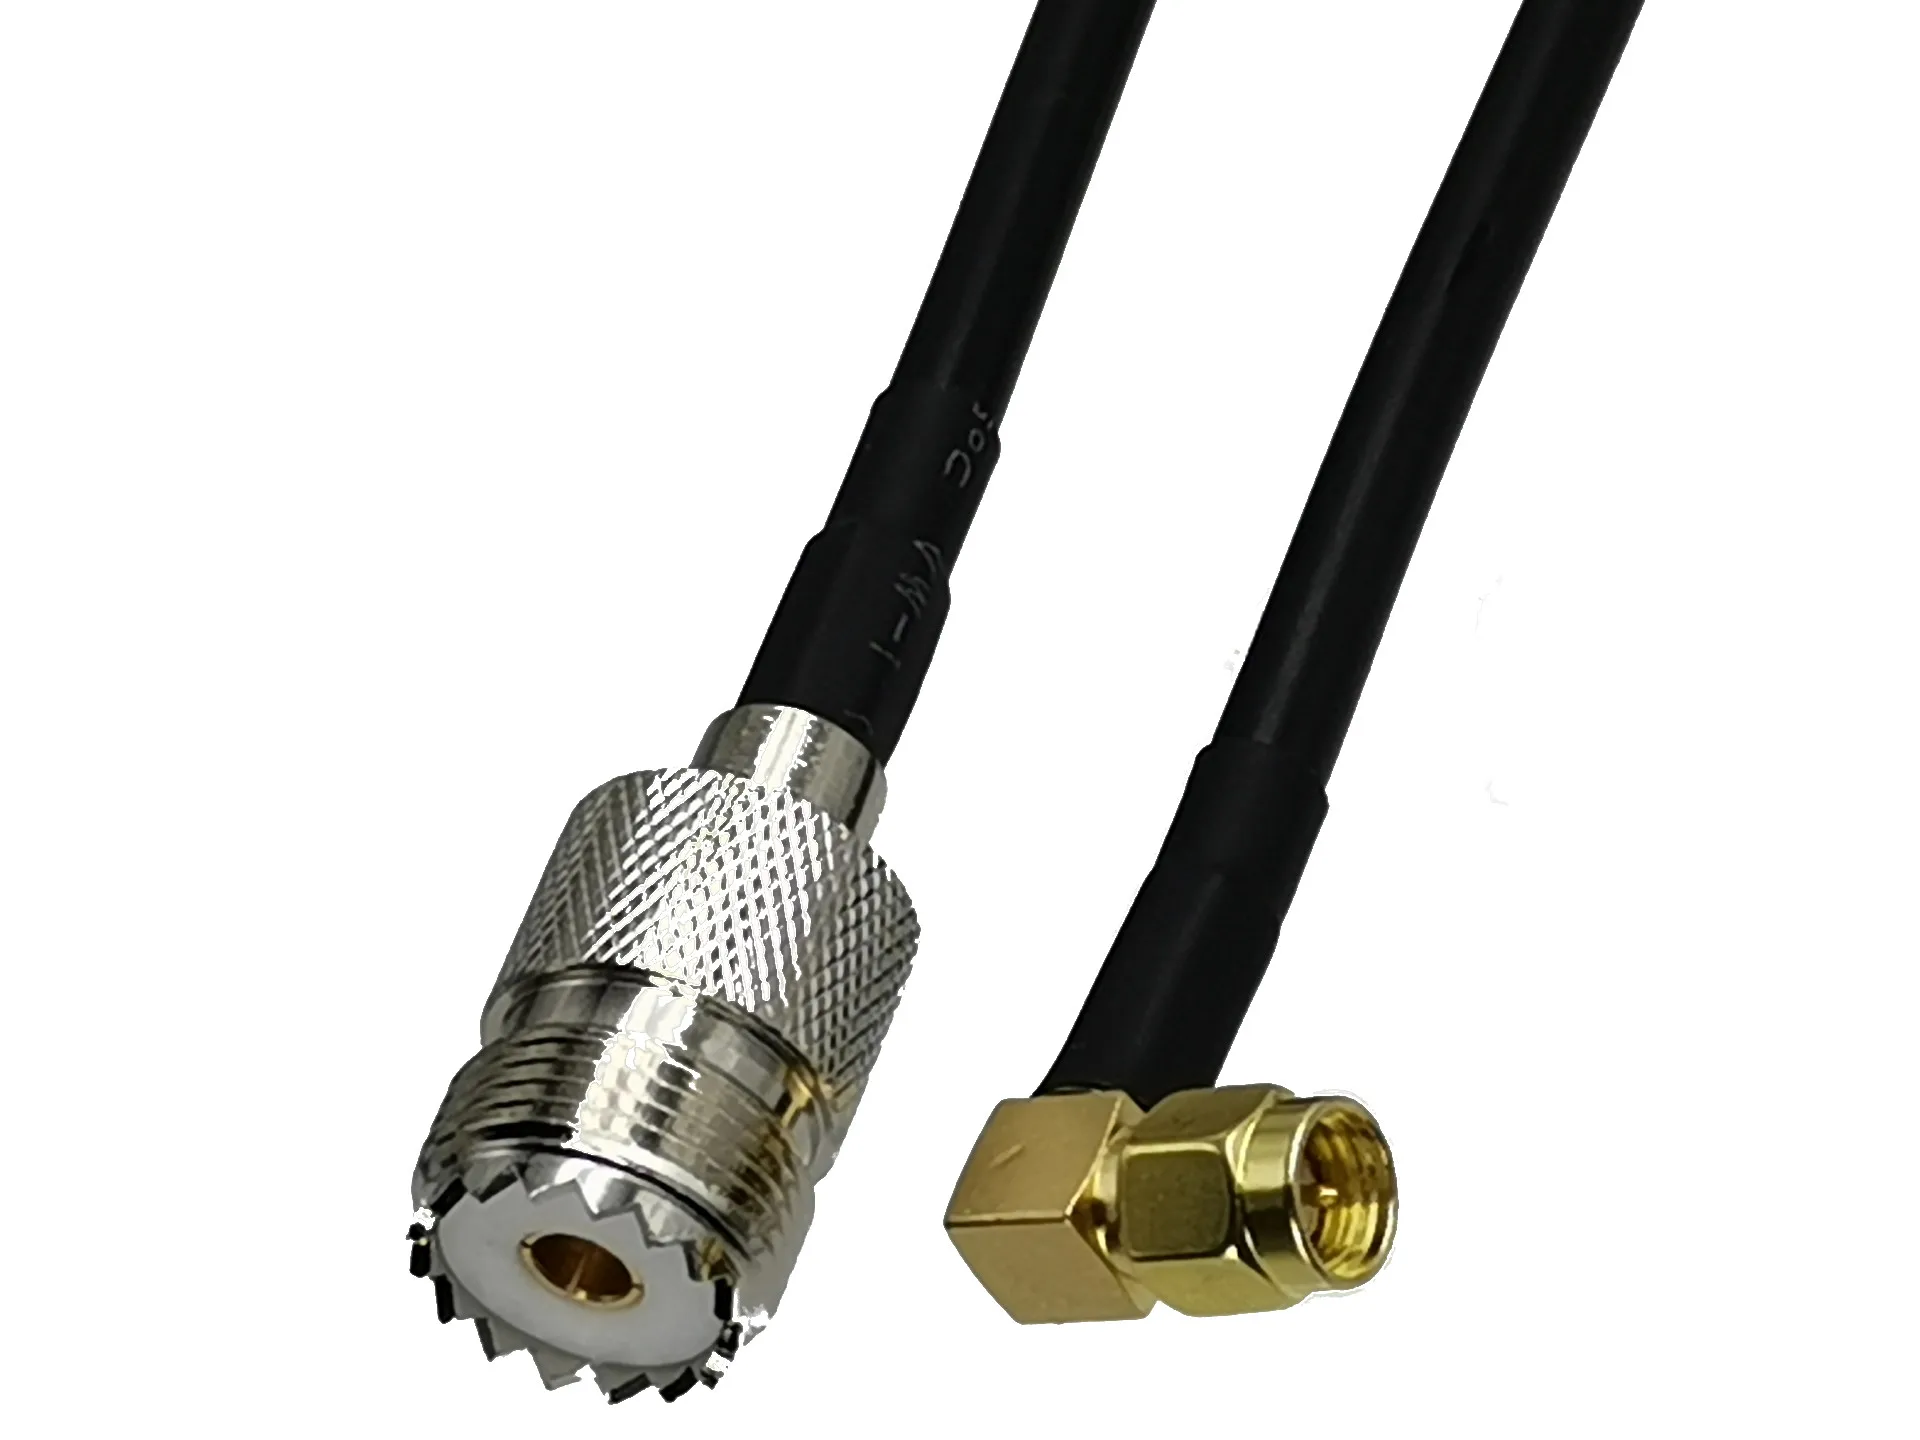 

1pcs RG58 SMA Male Plug Right Angle to UHF SO239 Female Jack RF Coaxial Connector Pigtail Jumper Cable New 6inch~5M